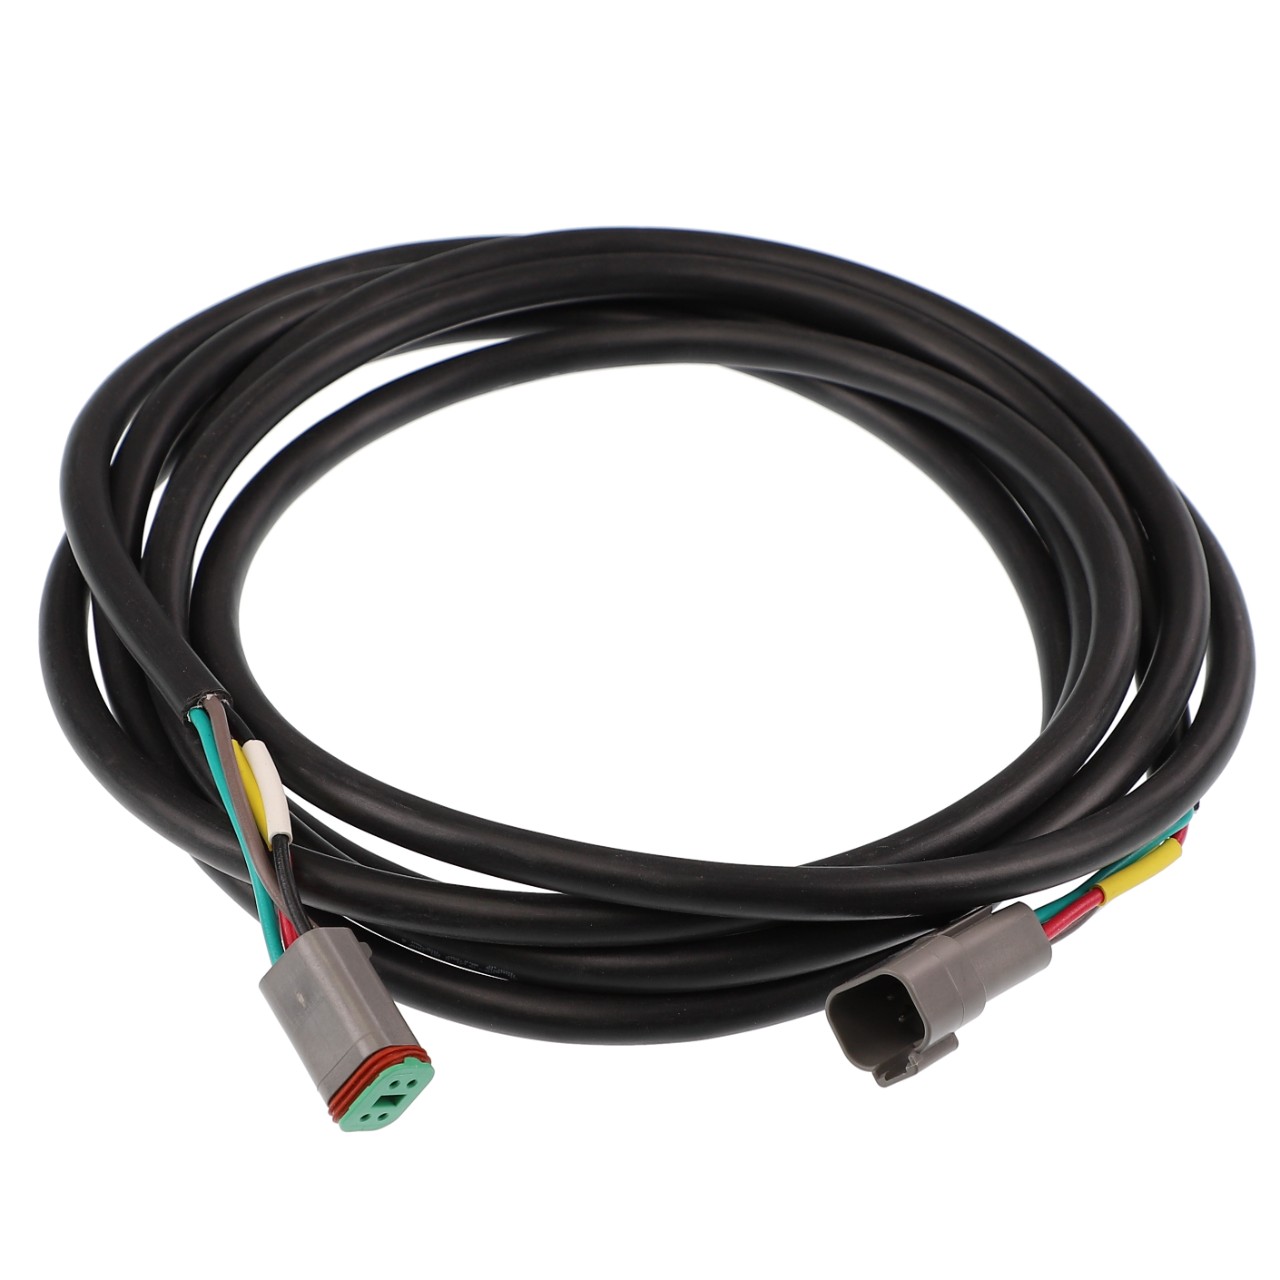 LIGHTS WIRE HARNESS | AGCO Parts